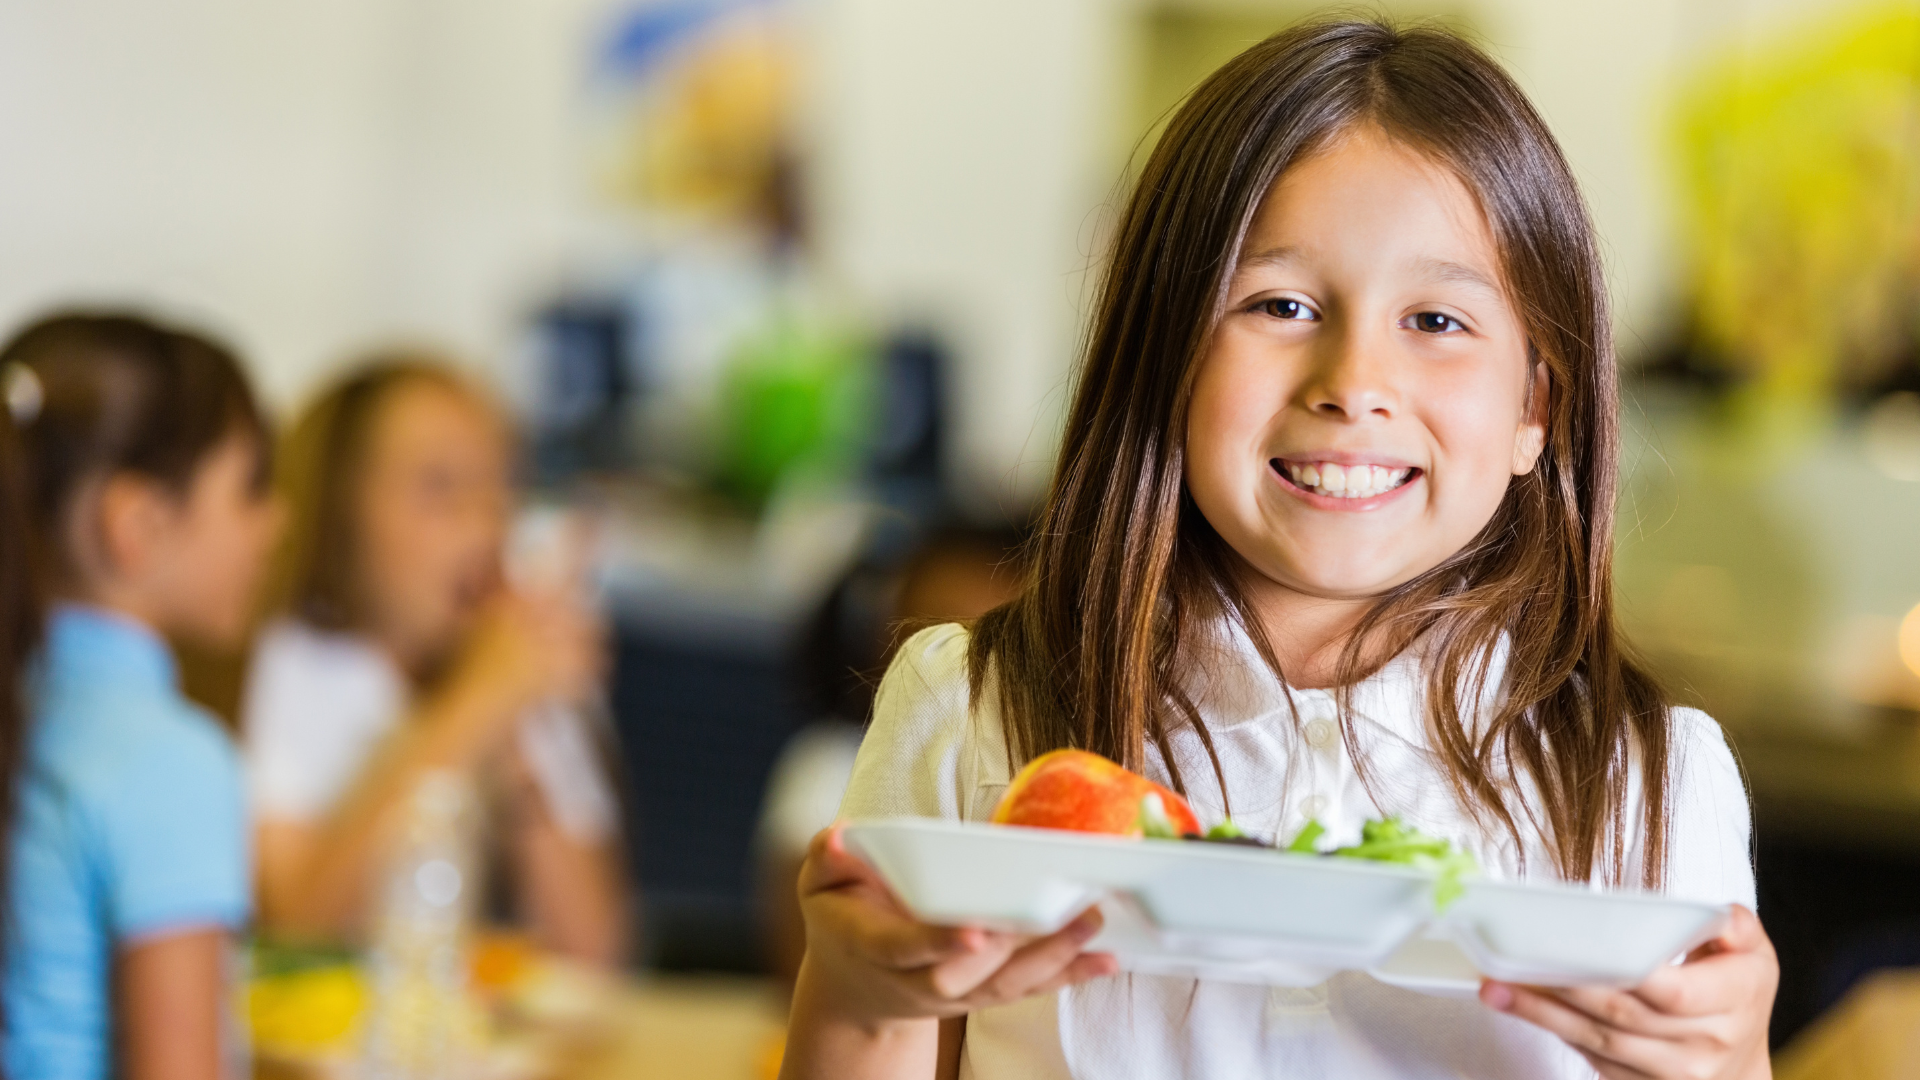 Looking for free summer meals for kids in your neighborhood? Here's how to find them.